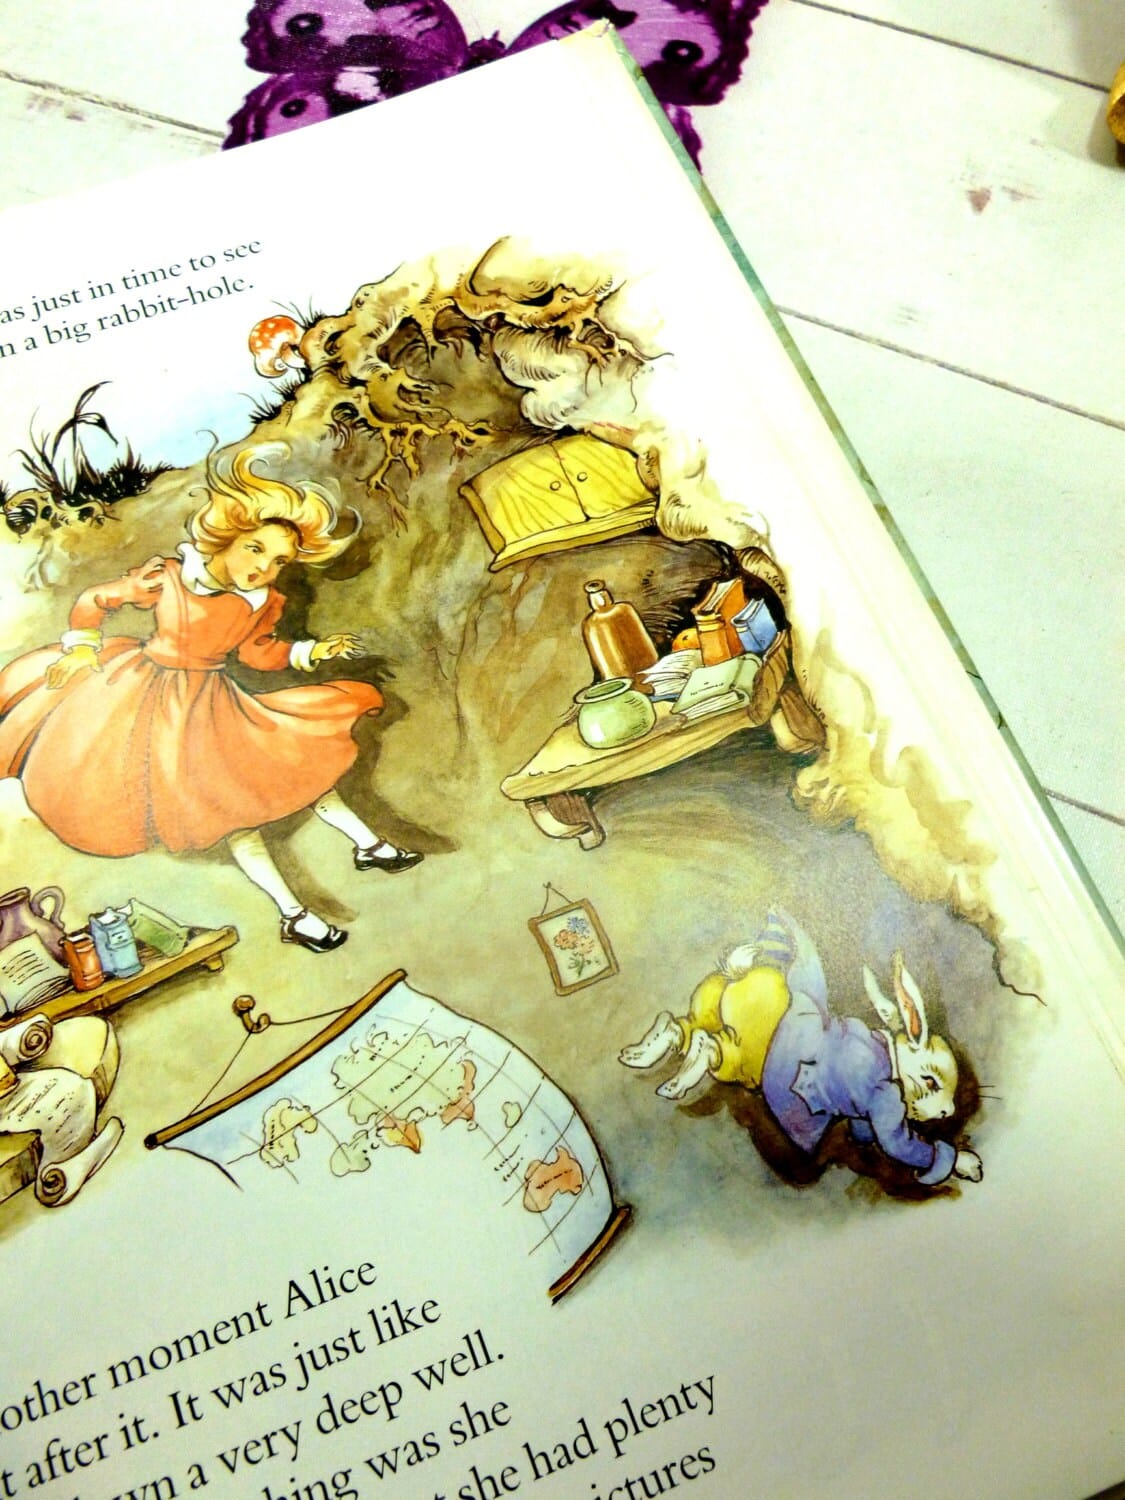 The Mad HatteAlice wearing an orange dress falling down the rabbit hole illustration from vintage Alice in Wonderland book by Rene Cloke. 